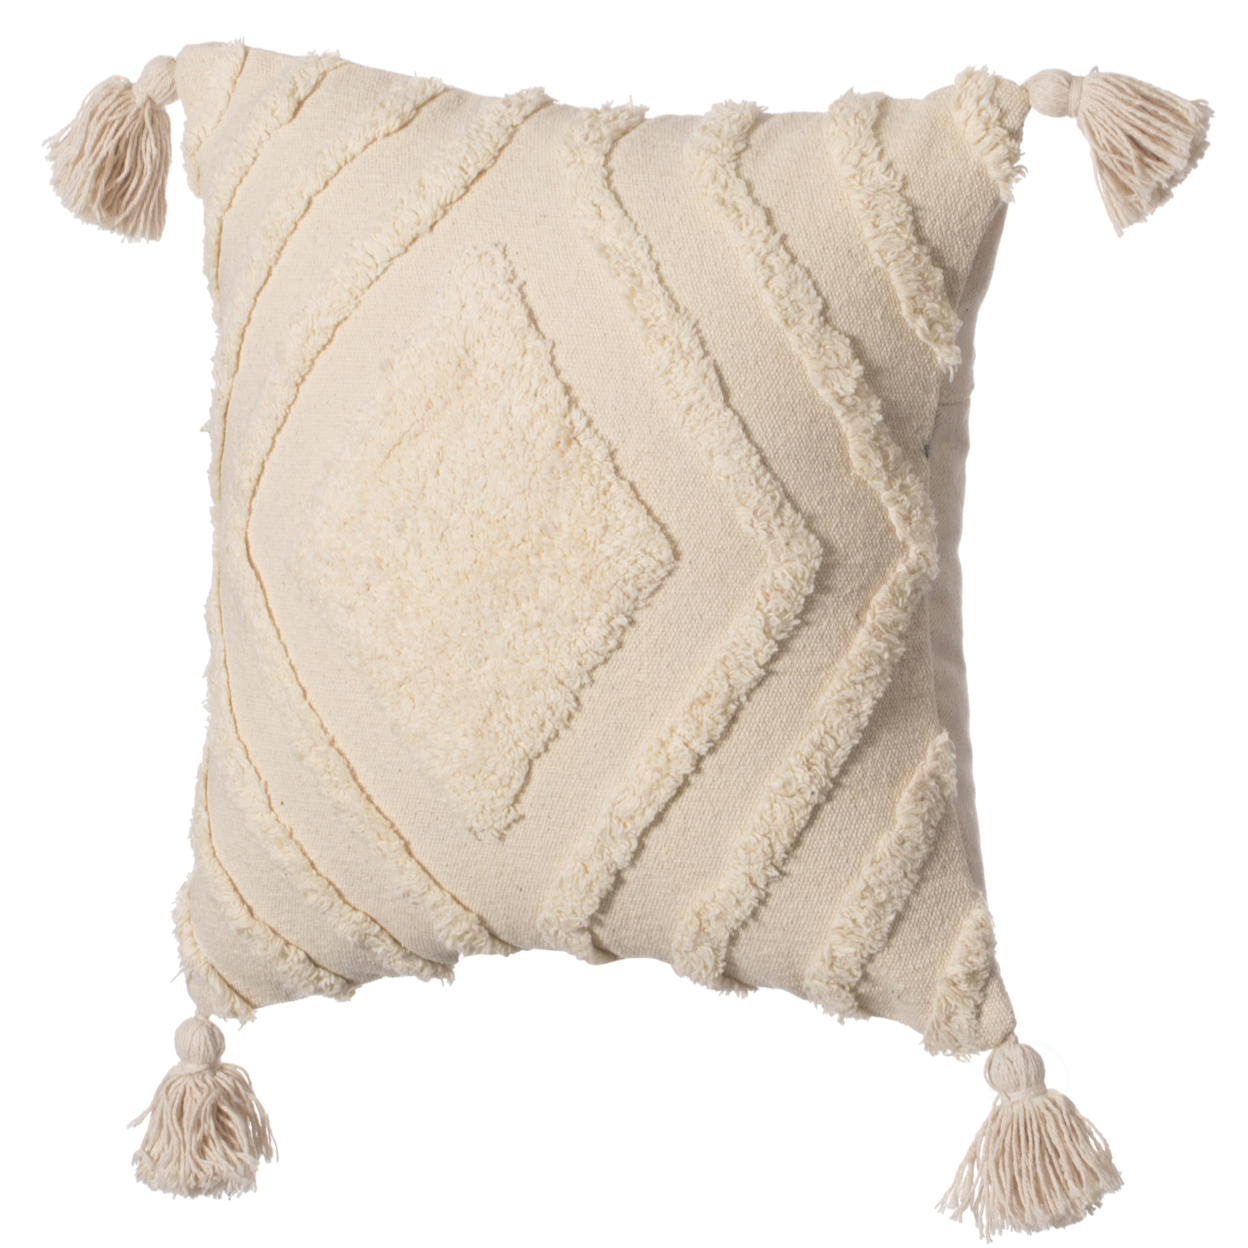 16 Handwoven Cotton Throw Pillow Cover With White On White Tufted Design And Tassel Corners - Stem With Cushion